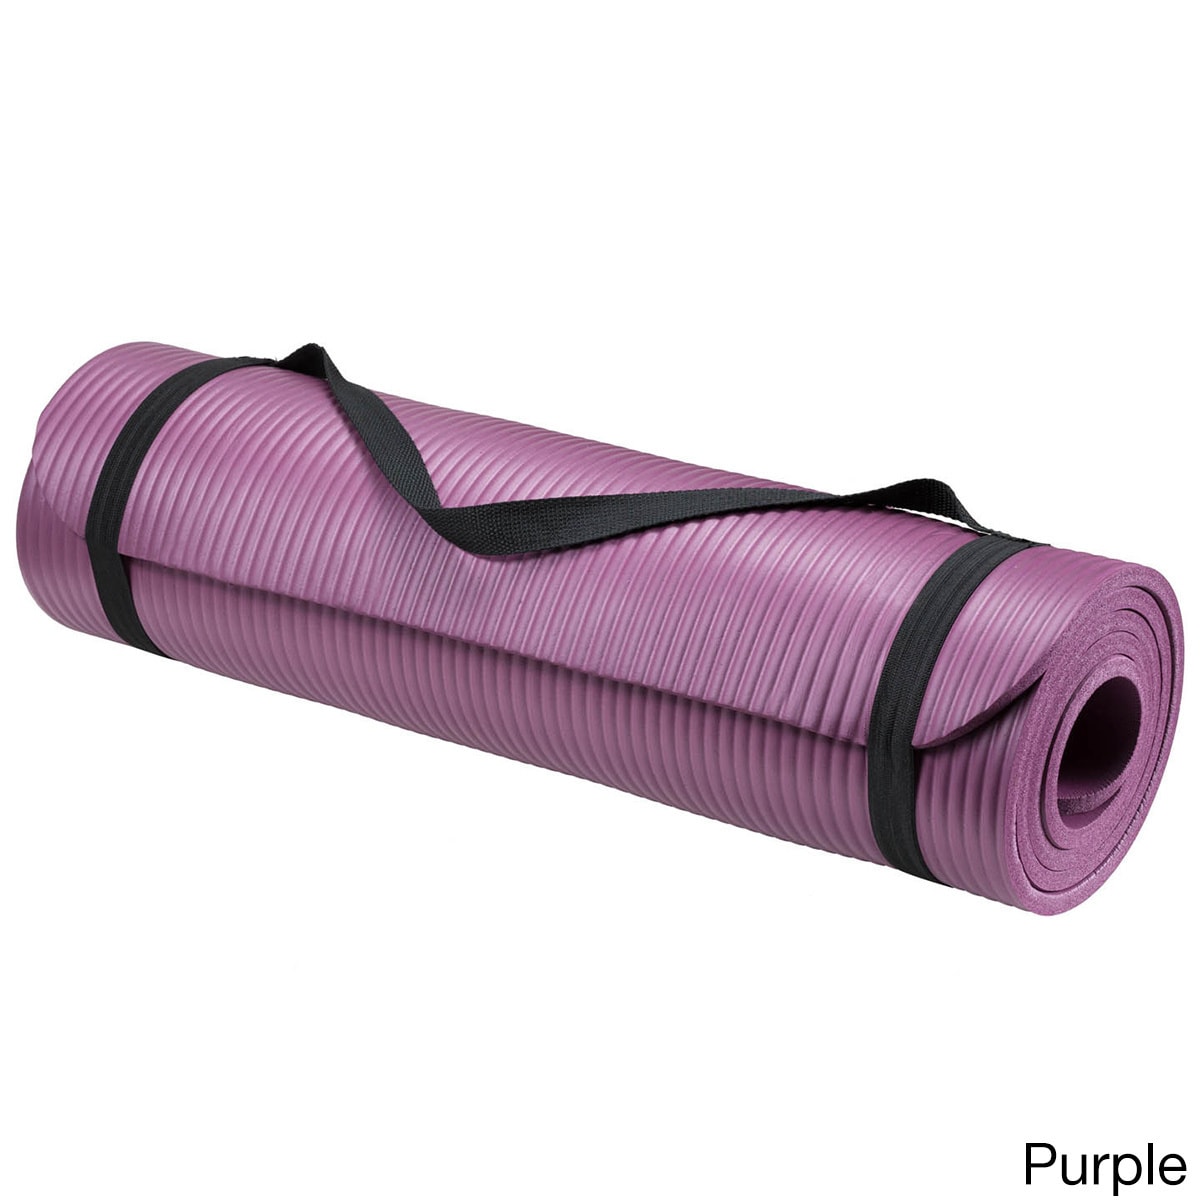 yoga or exercise mat